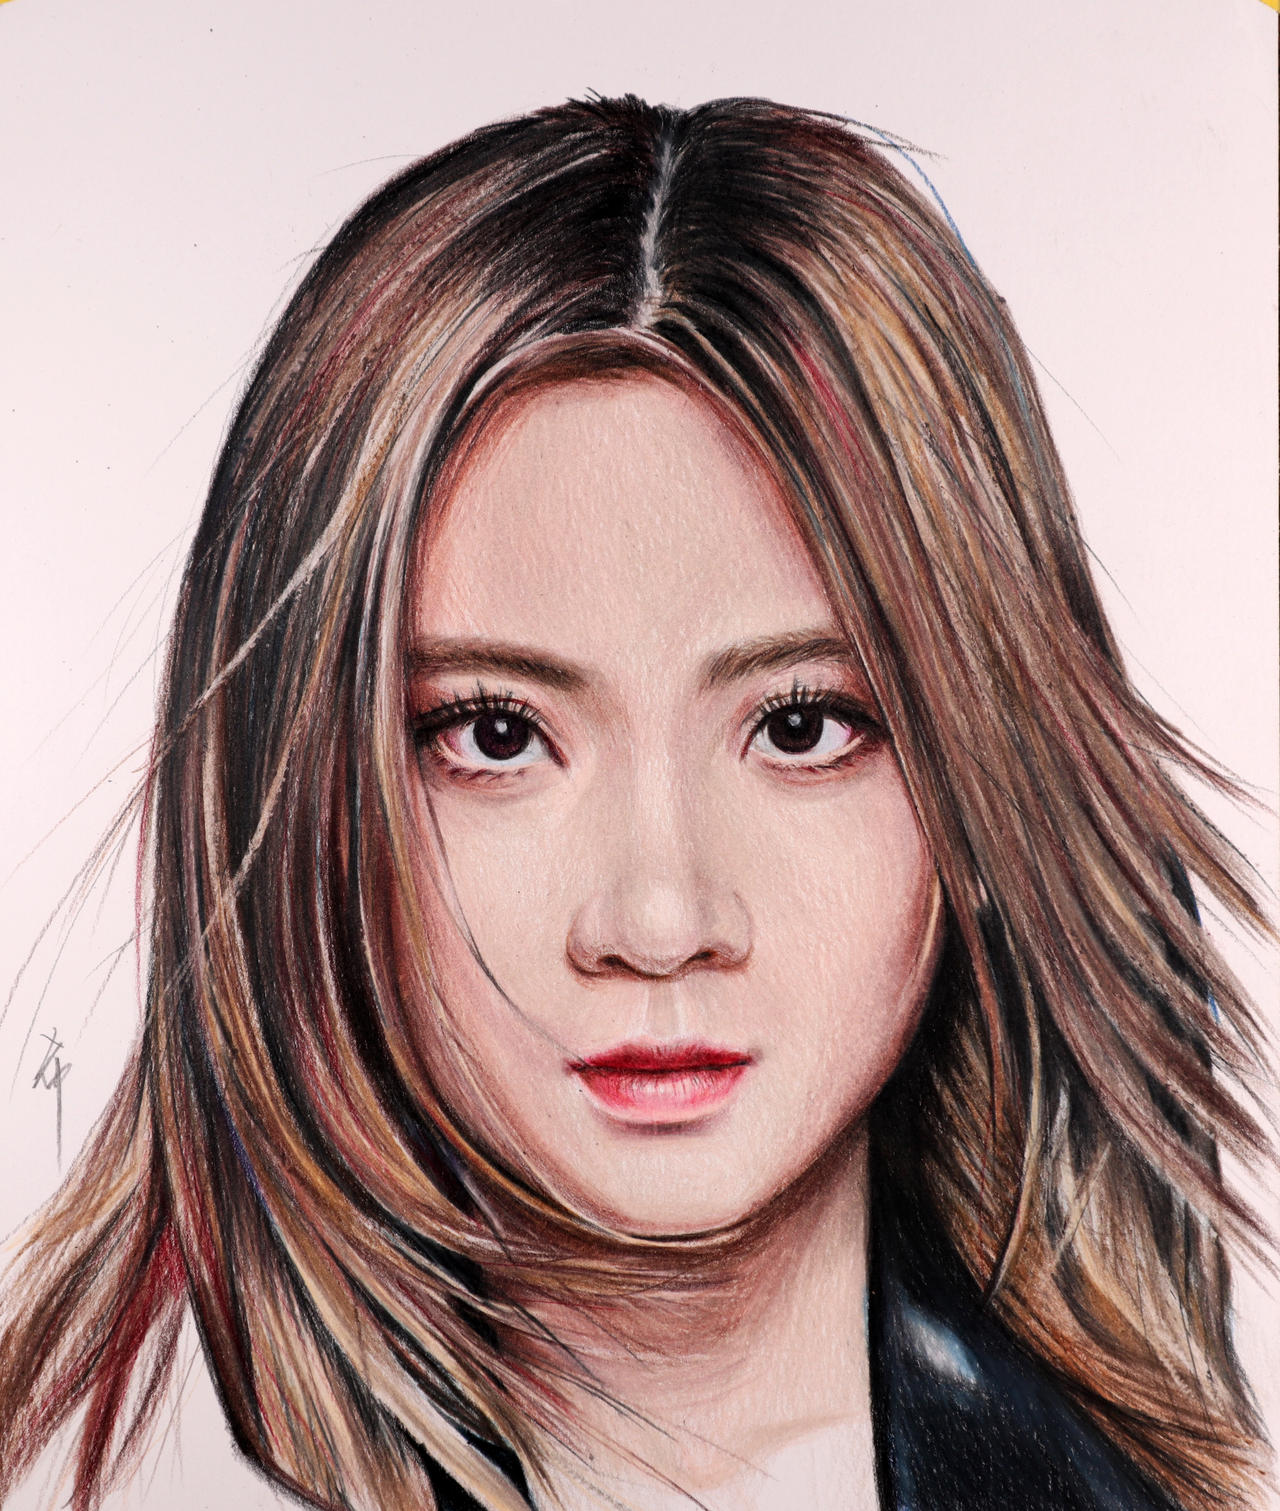 Collar Candy wong coloured pencil drawing by heidrawing on DeviantArt